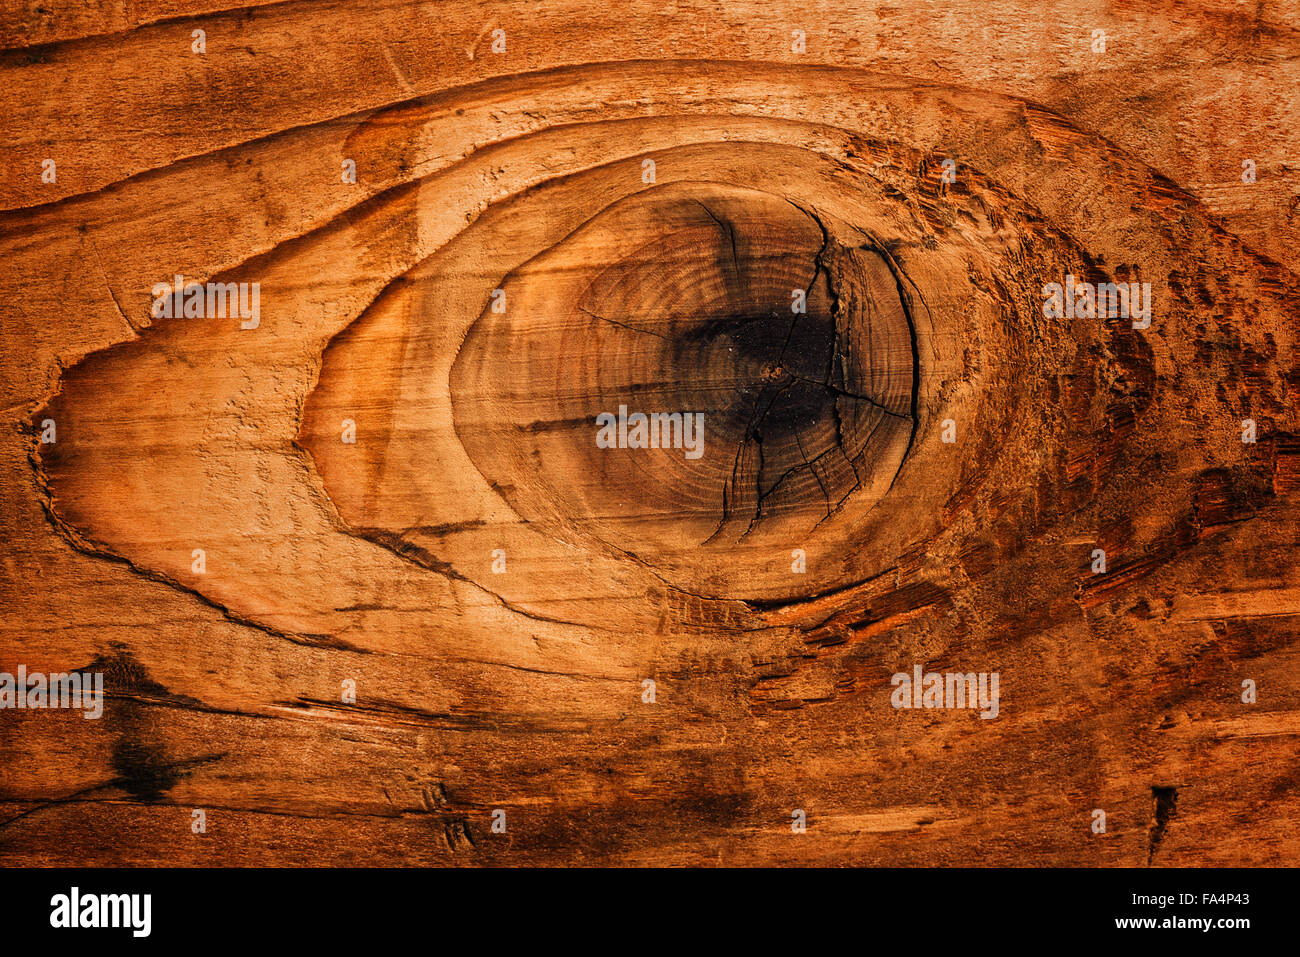 Old oak board wood knot natural texture Stock Photo